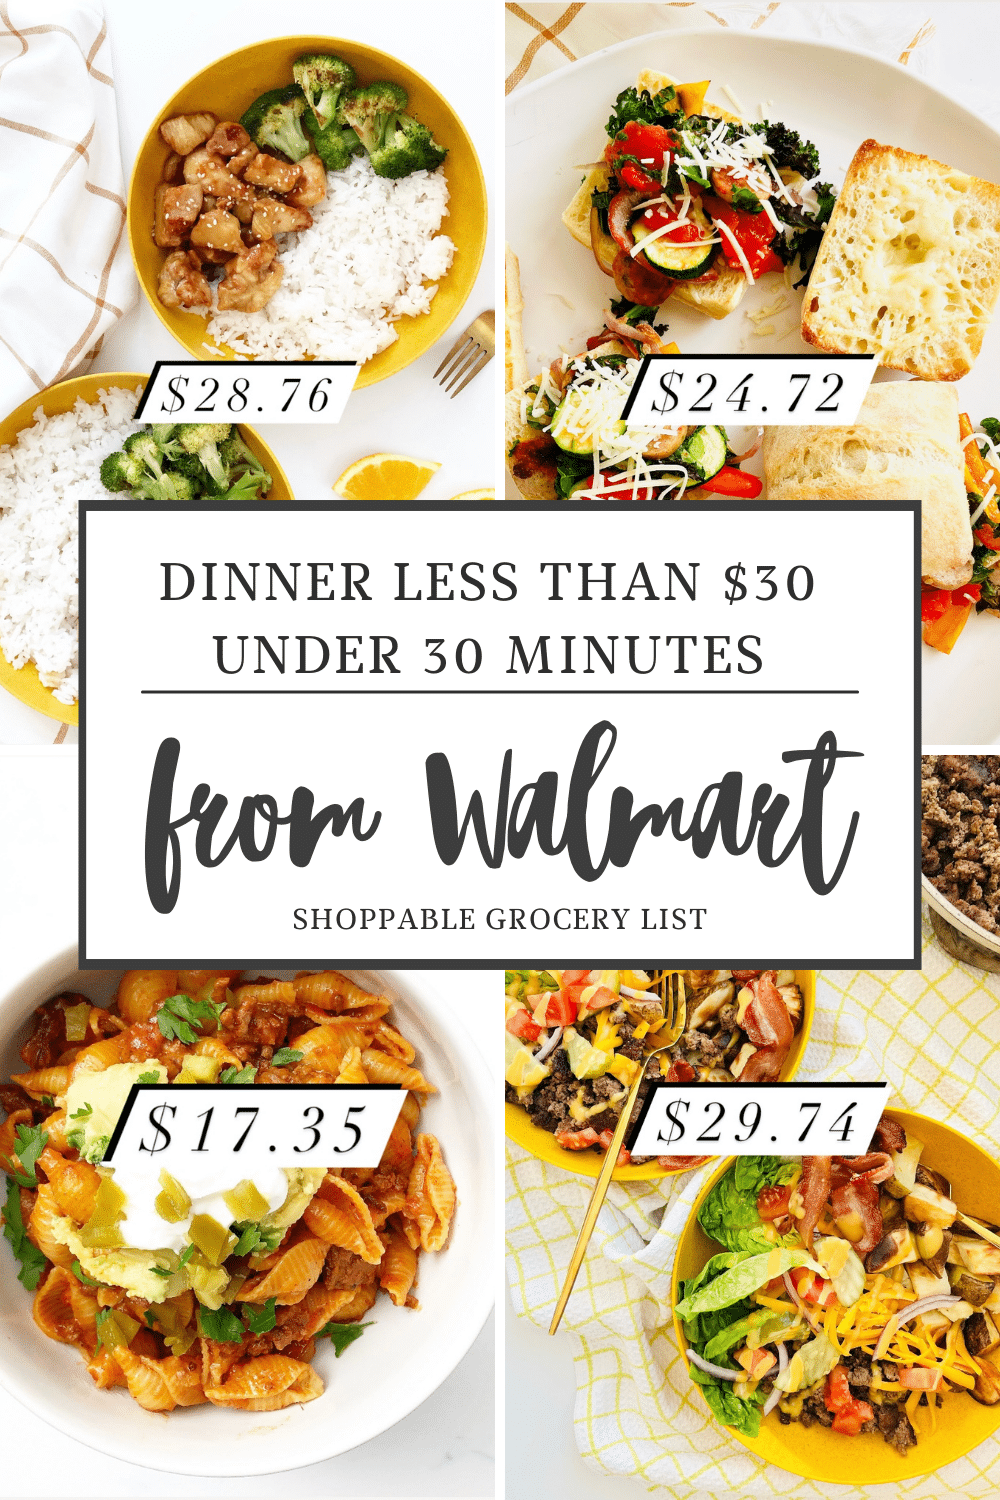 Week 2 Instacart Meal Plan (Dinners Under $30 and Less Than 30 Minutes)